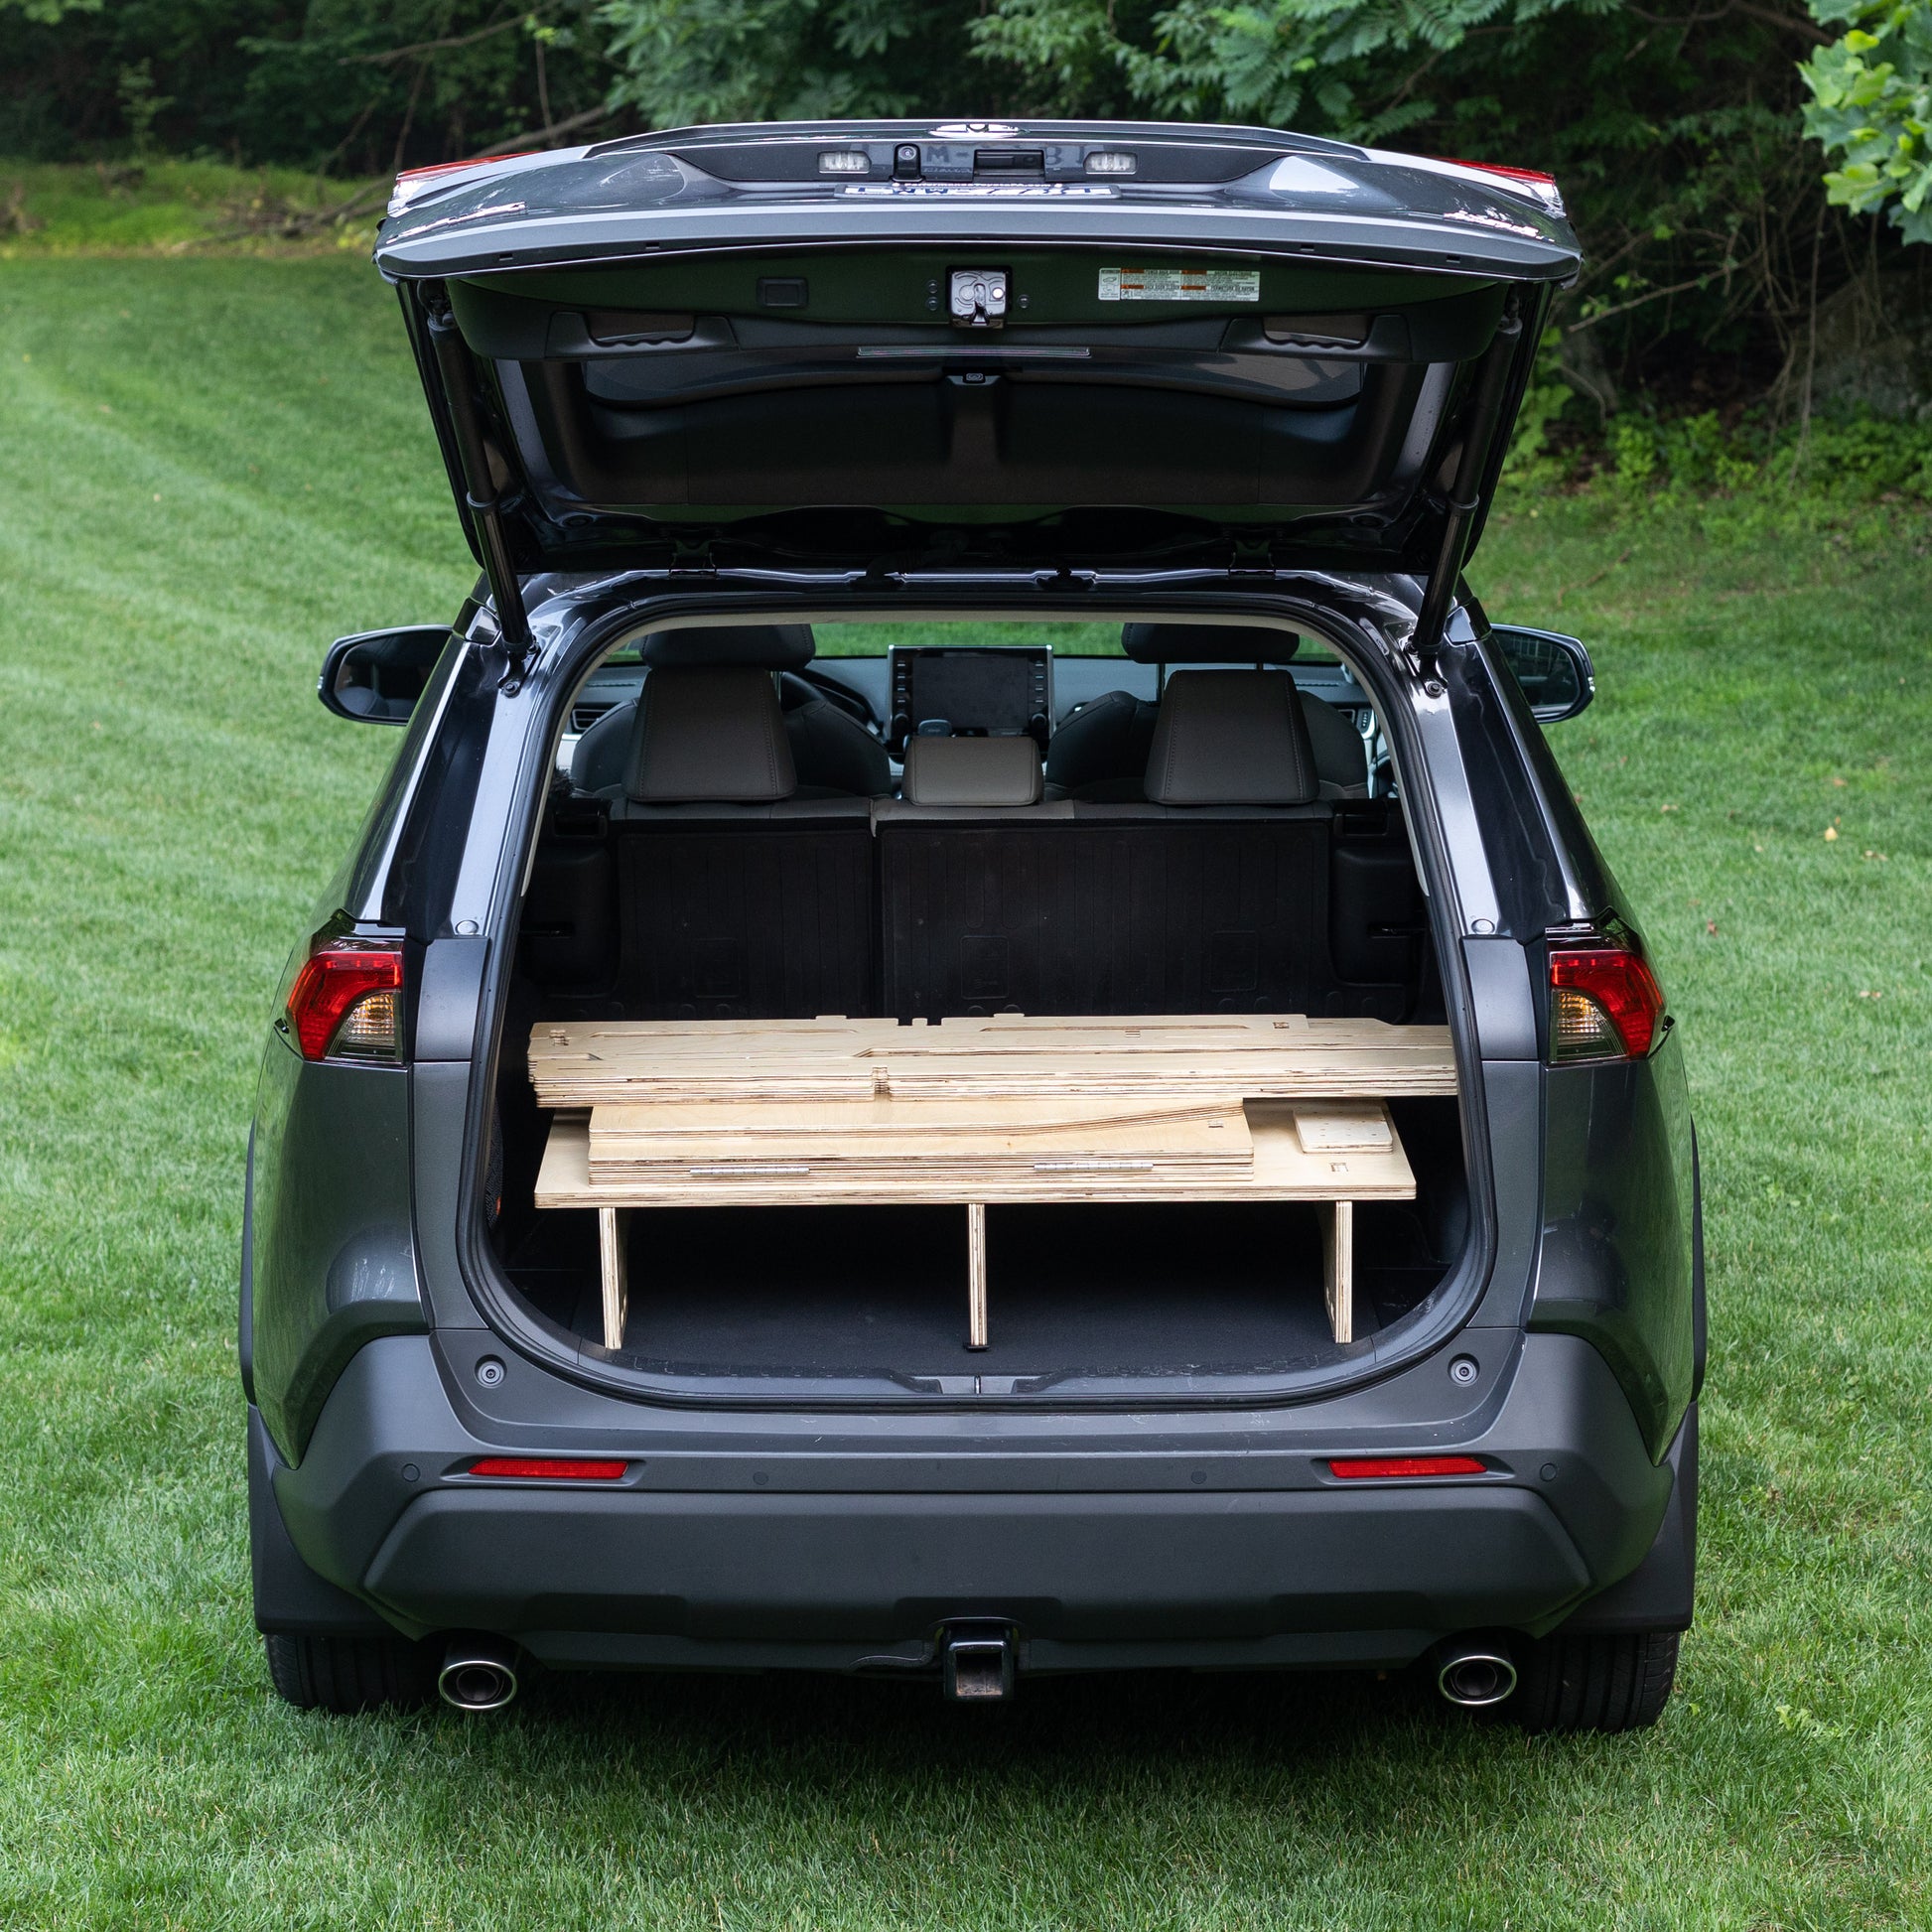 The trunk of a CarToCamp Toyota RAV4 Sleeping Platform with storage space.